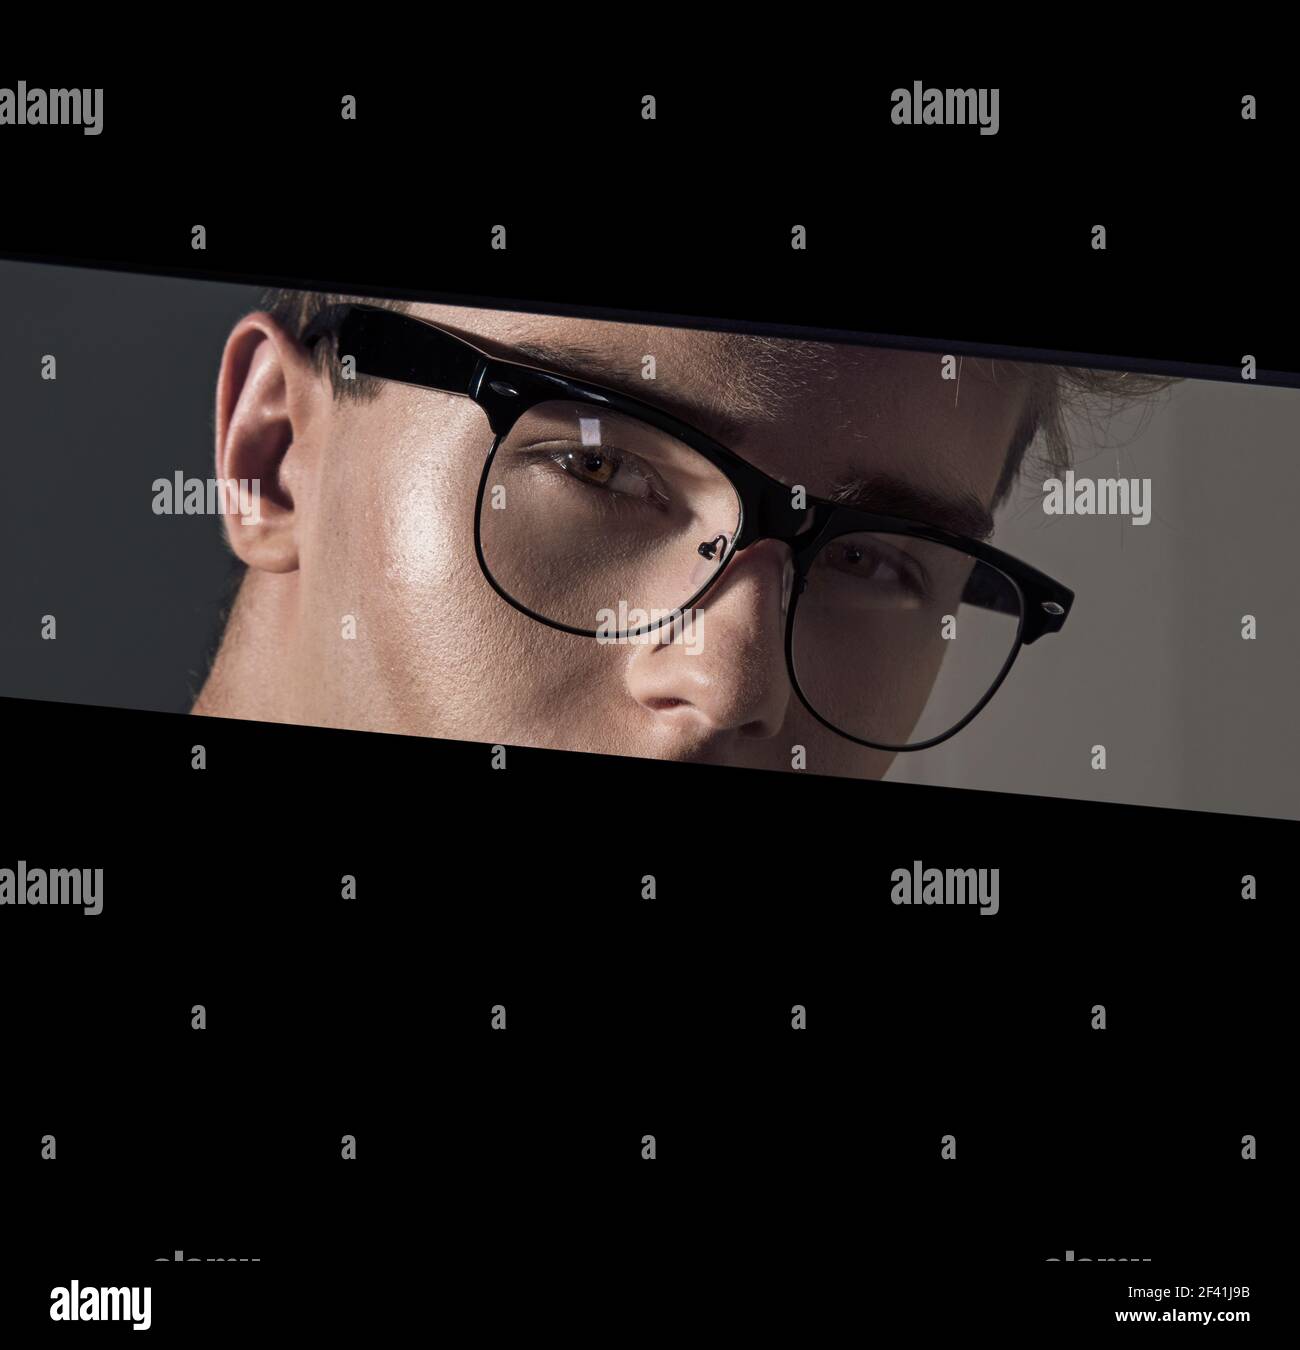 Portriat of a young guy wearing the eyeglasses Stock Photo